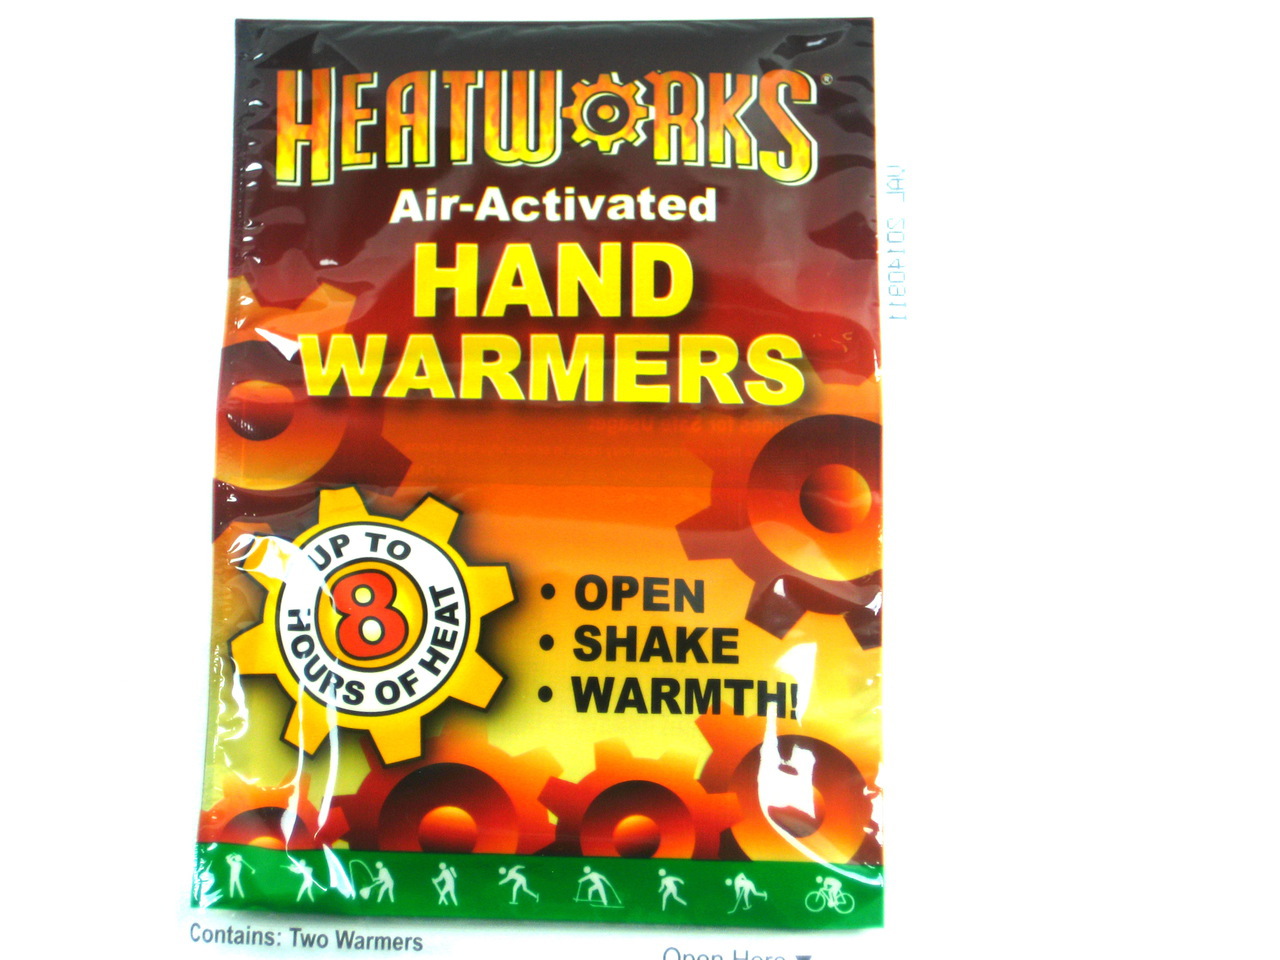 Hand Warmers Air-Activated 1 pack- Two Warmers